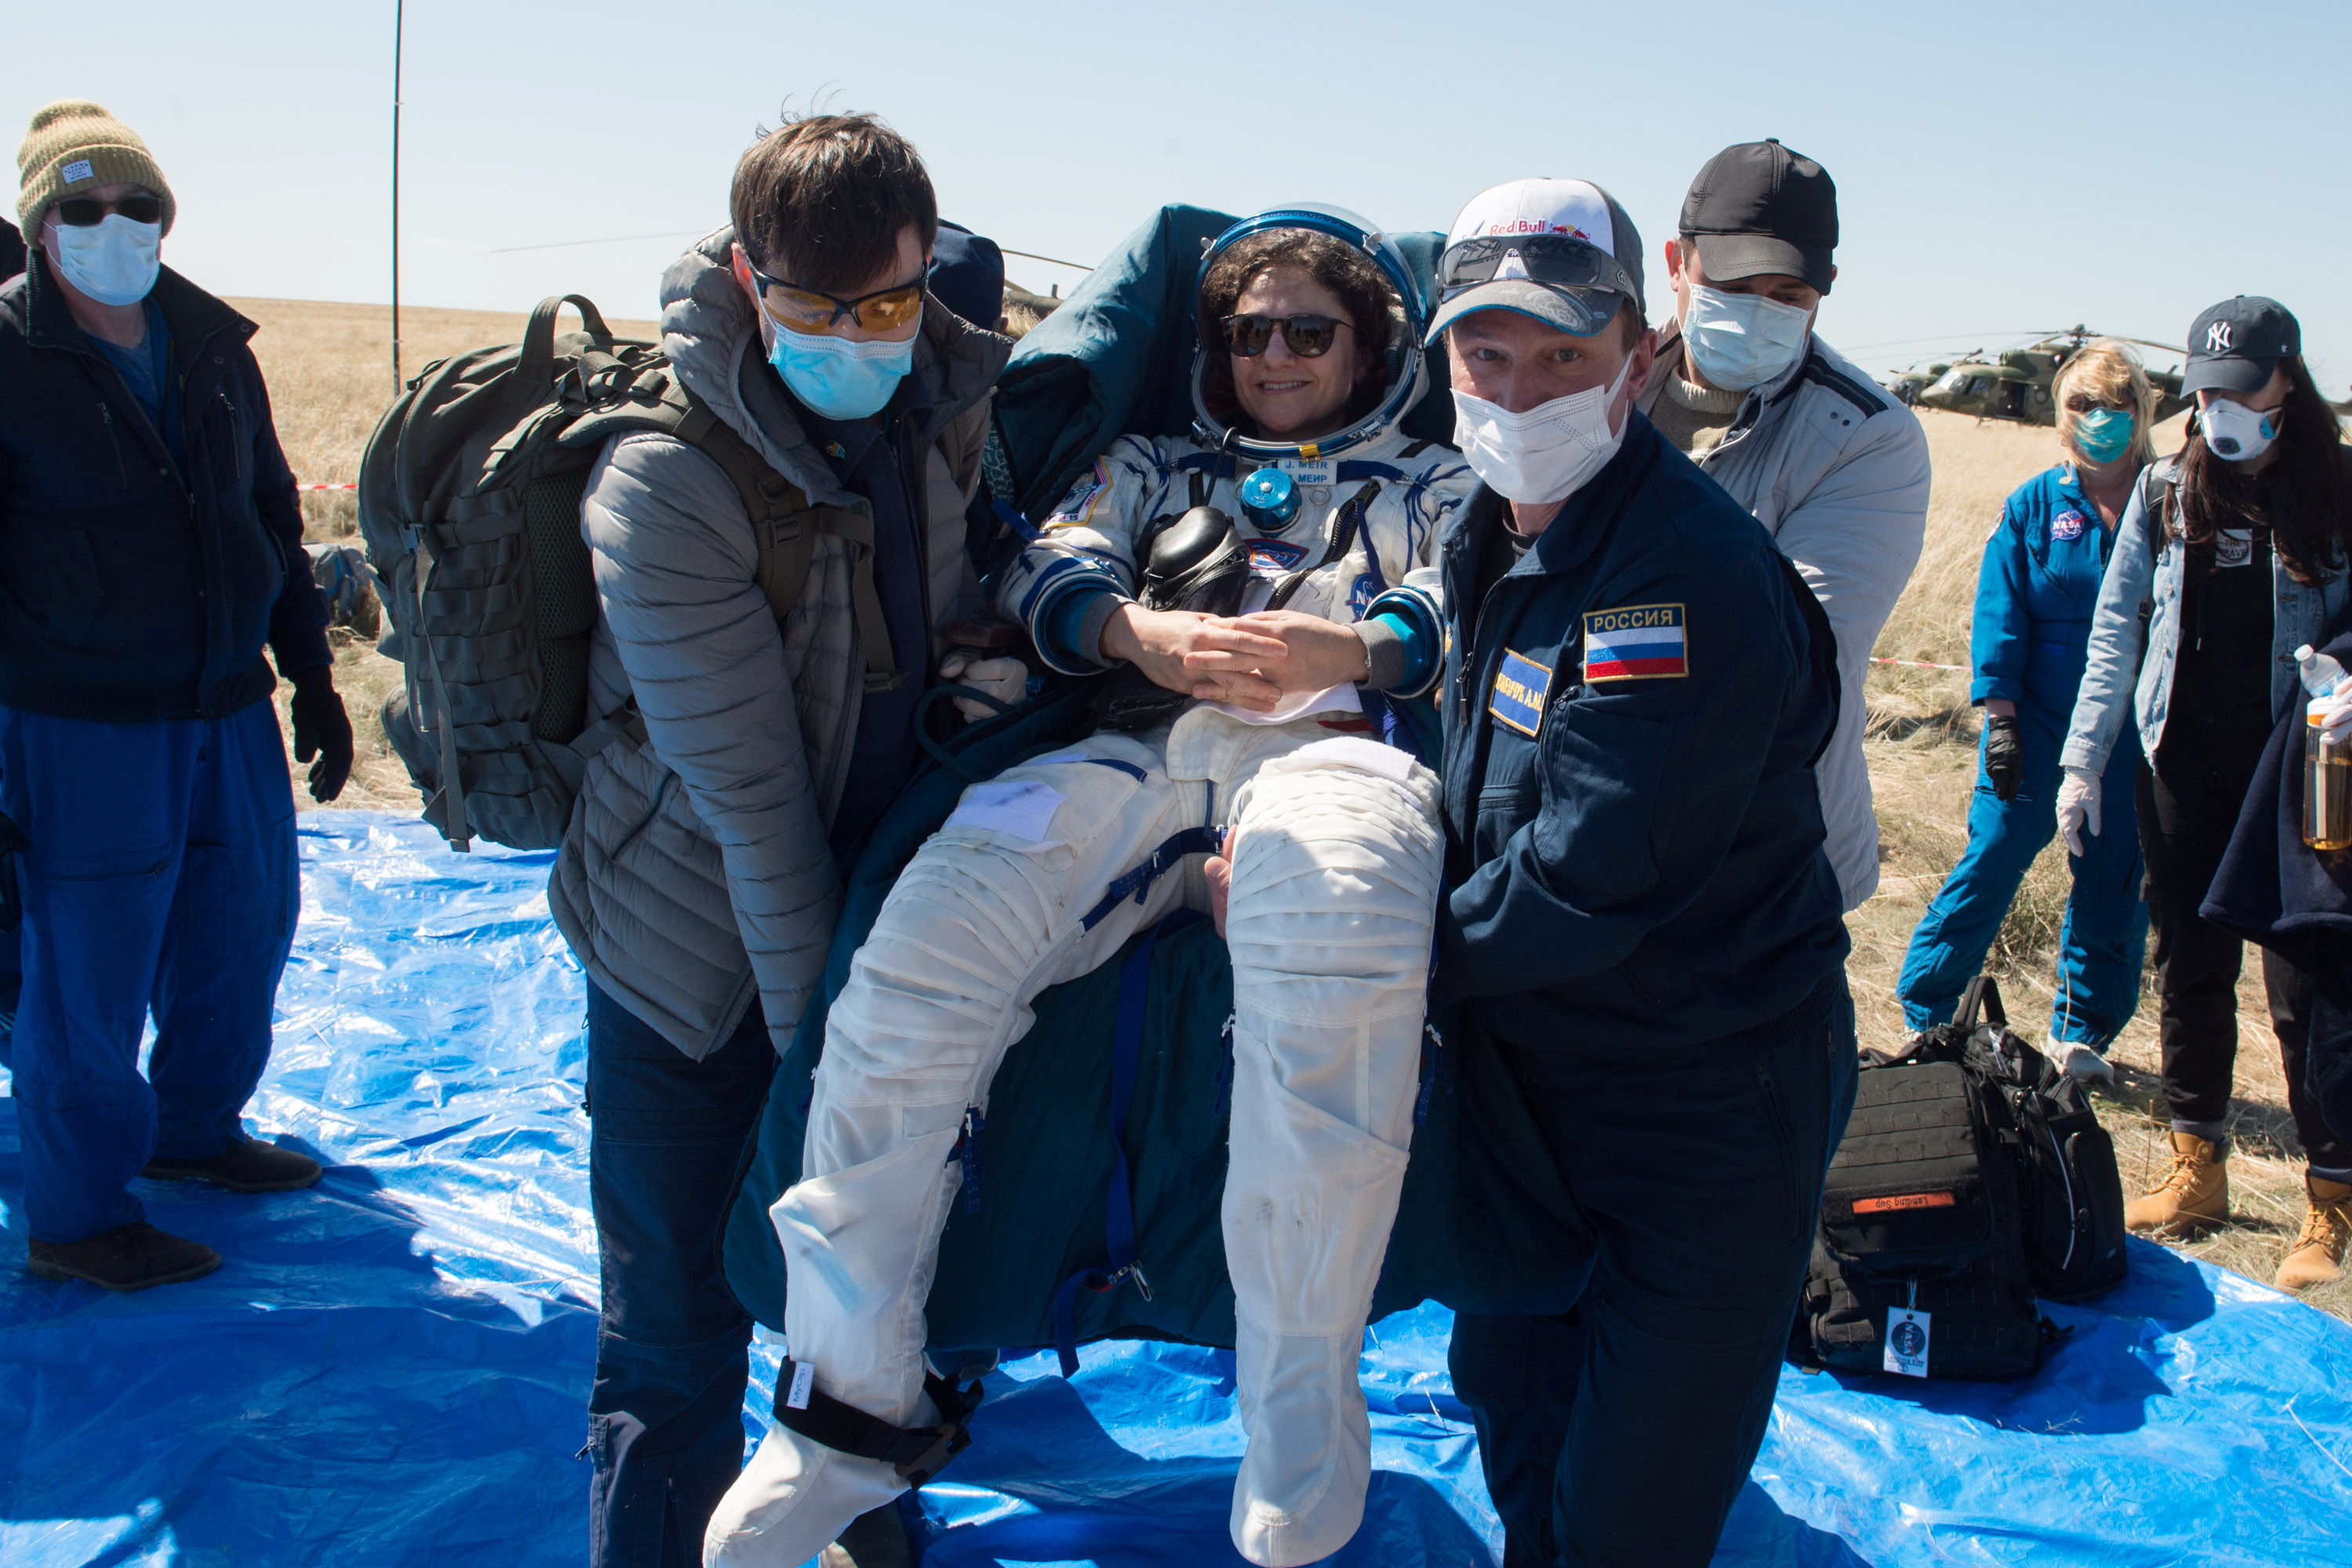 Ground personnel carry International Space Station (ISS) crew member Jessica Meir of NASA after landing the Soyuz MS-15 space capsule in a remote area outside Kazakhstan on April 17, 2020 (Reuters)